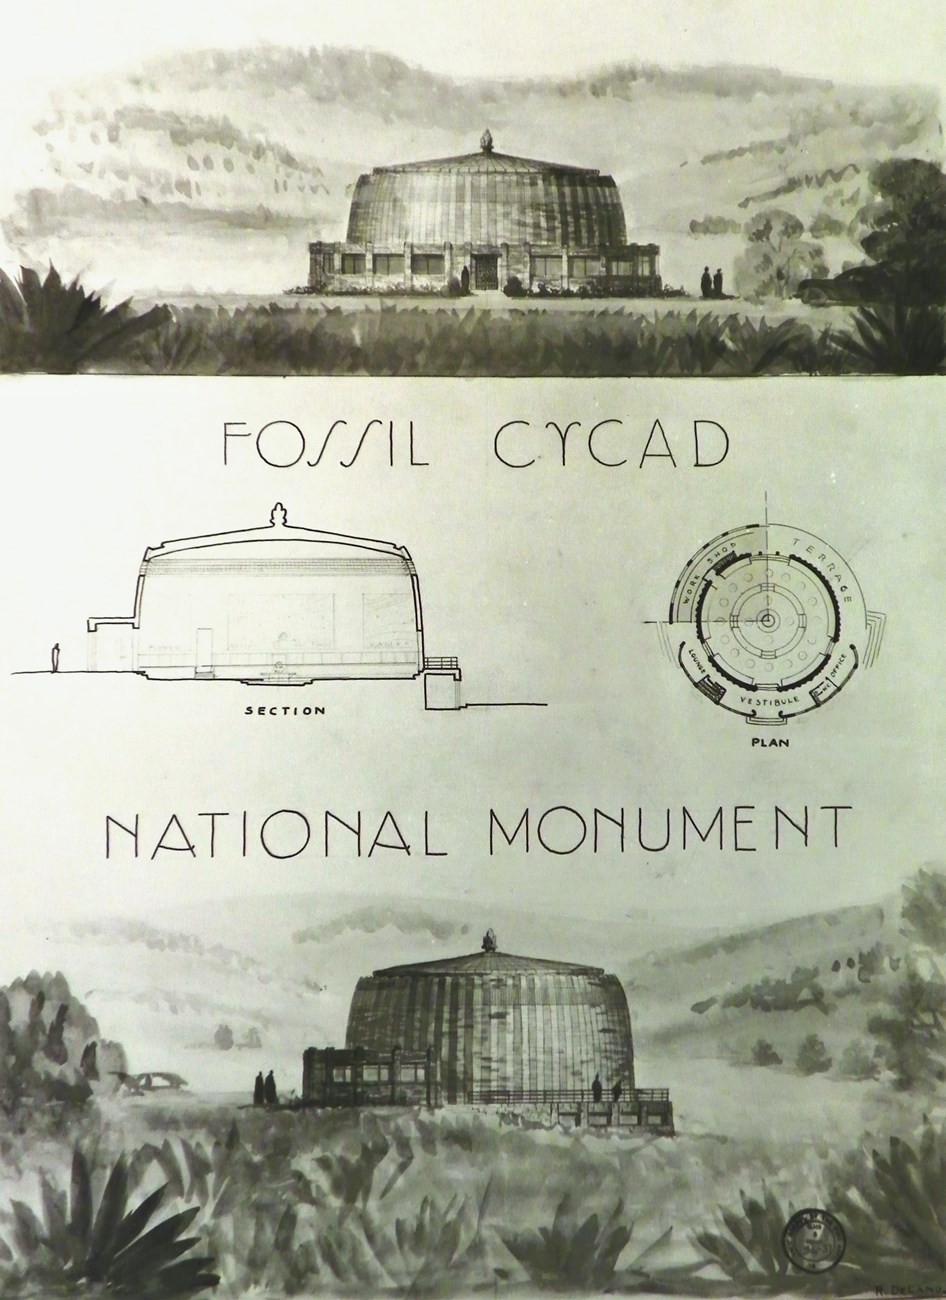 Drawings of a visitor center designed for Fossil Cycad National Monument